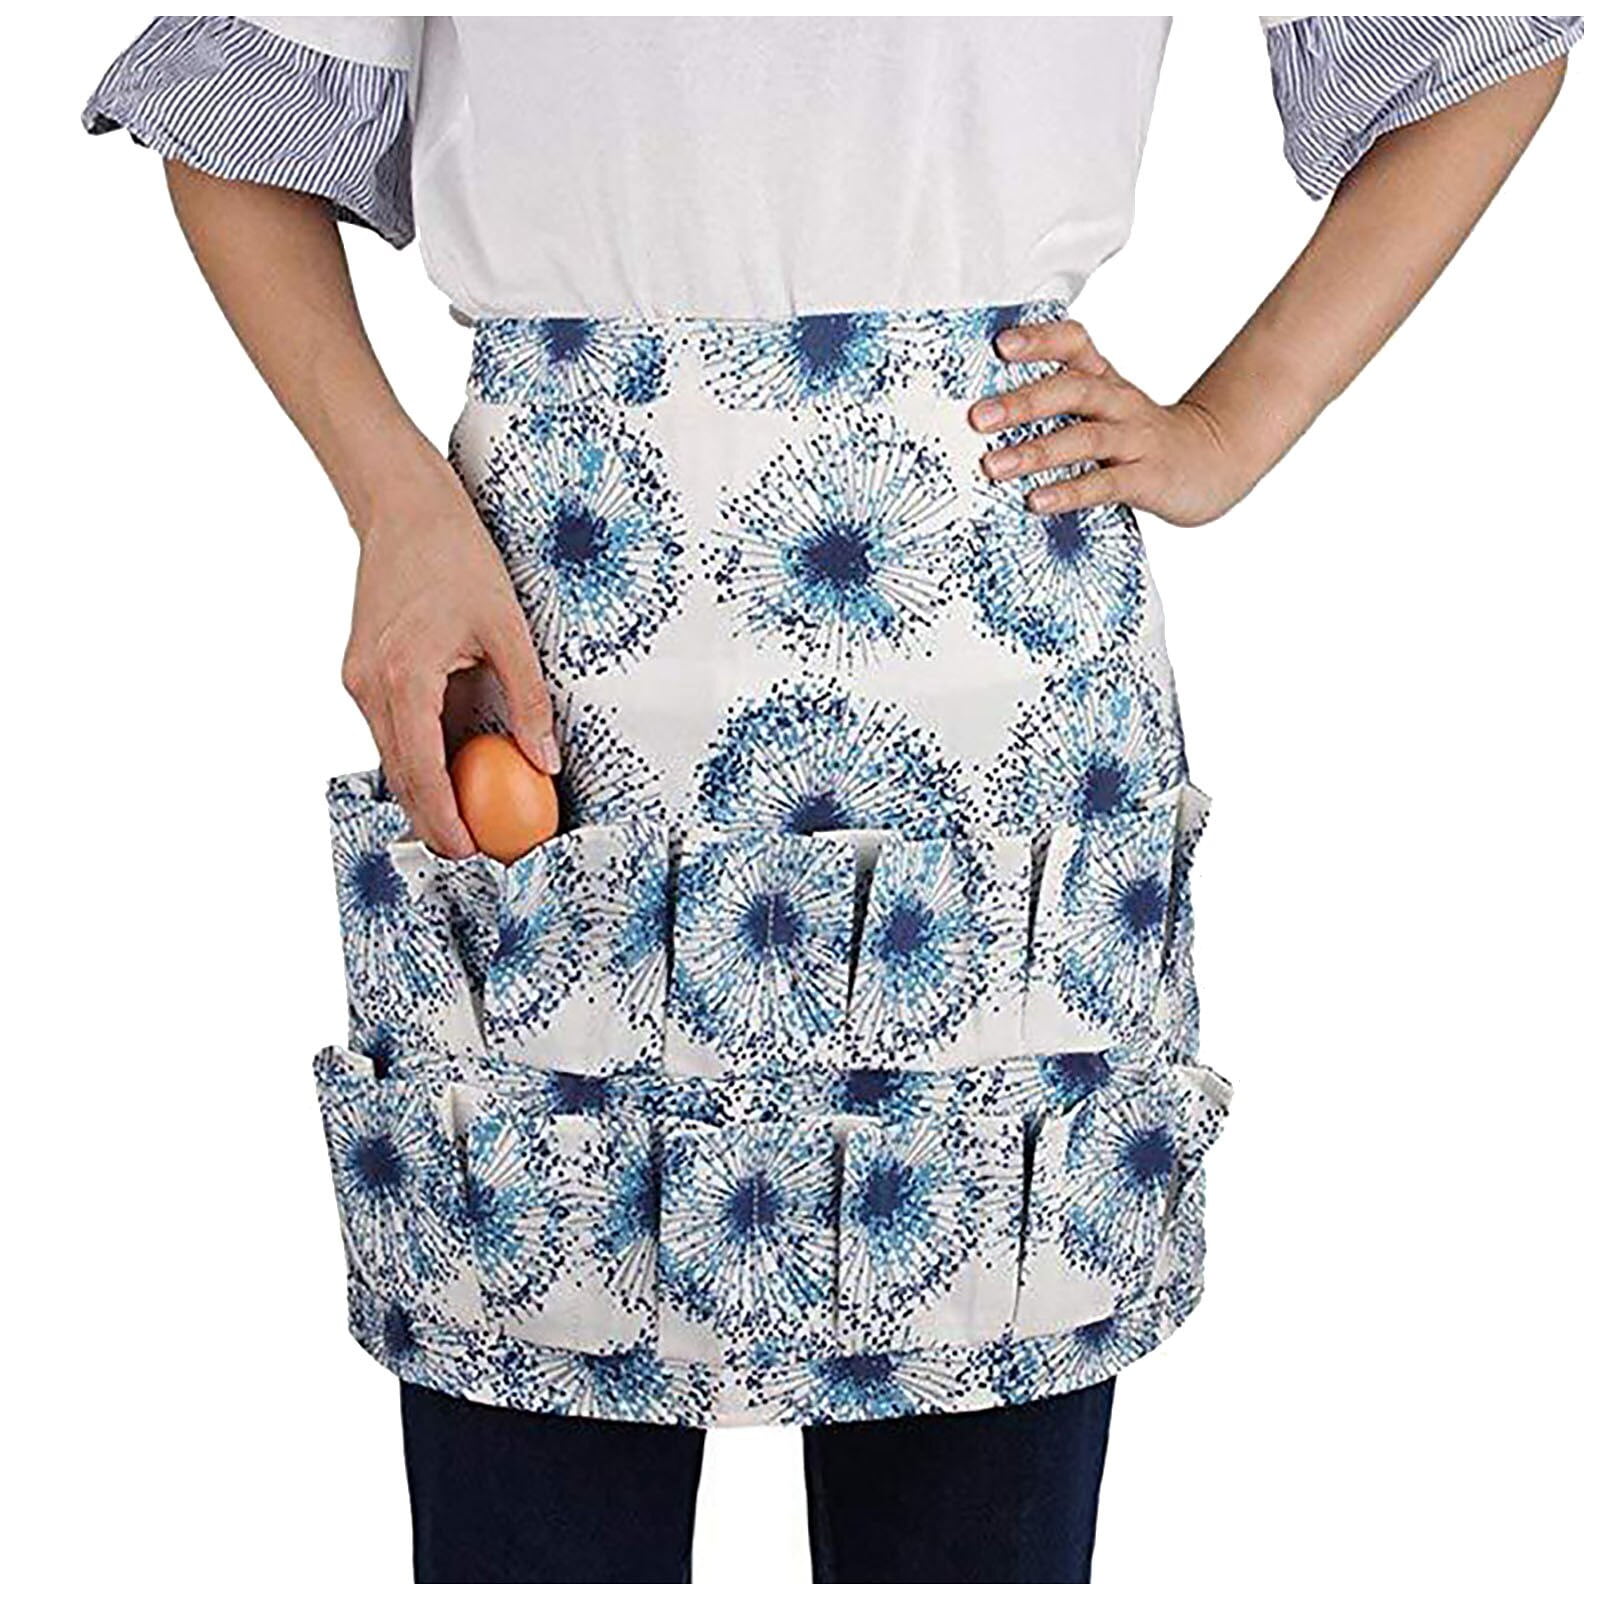 Eggs Collecting Apron Egg Holding Apron Deep Pocket Holder for Collecting  Holding Storing Eggs 